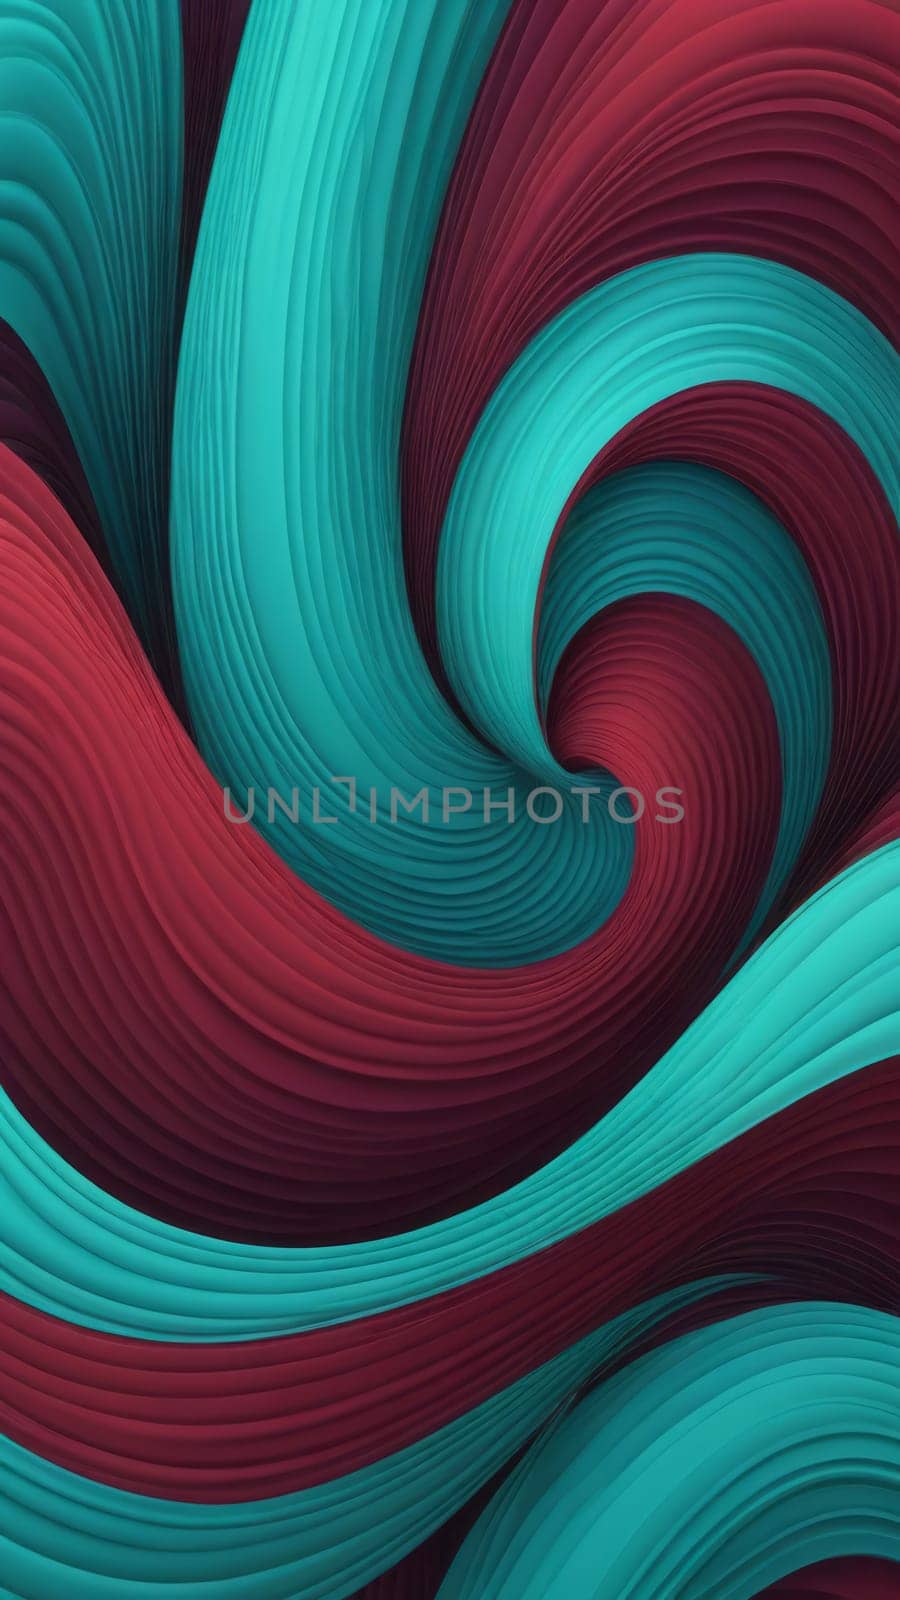 Art for inspiration from Swirled shapes and maroon by nkotlyar